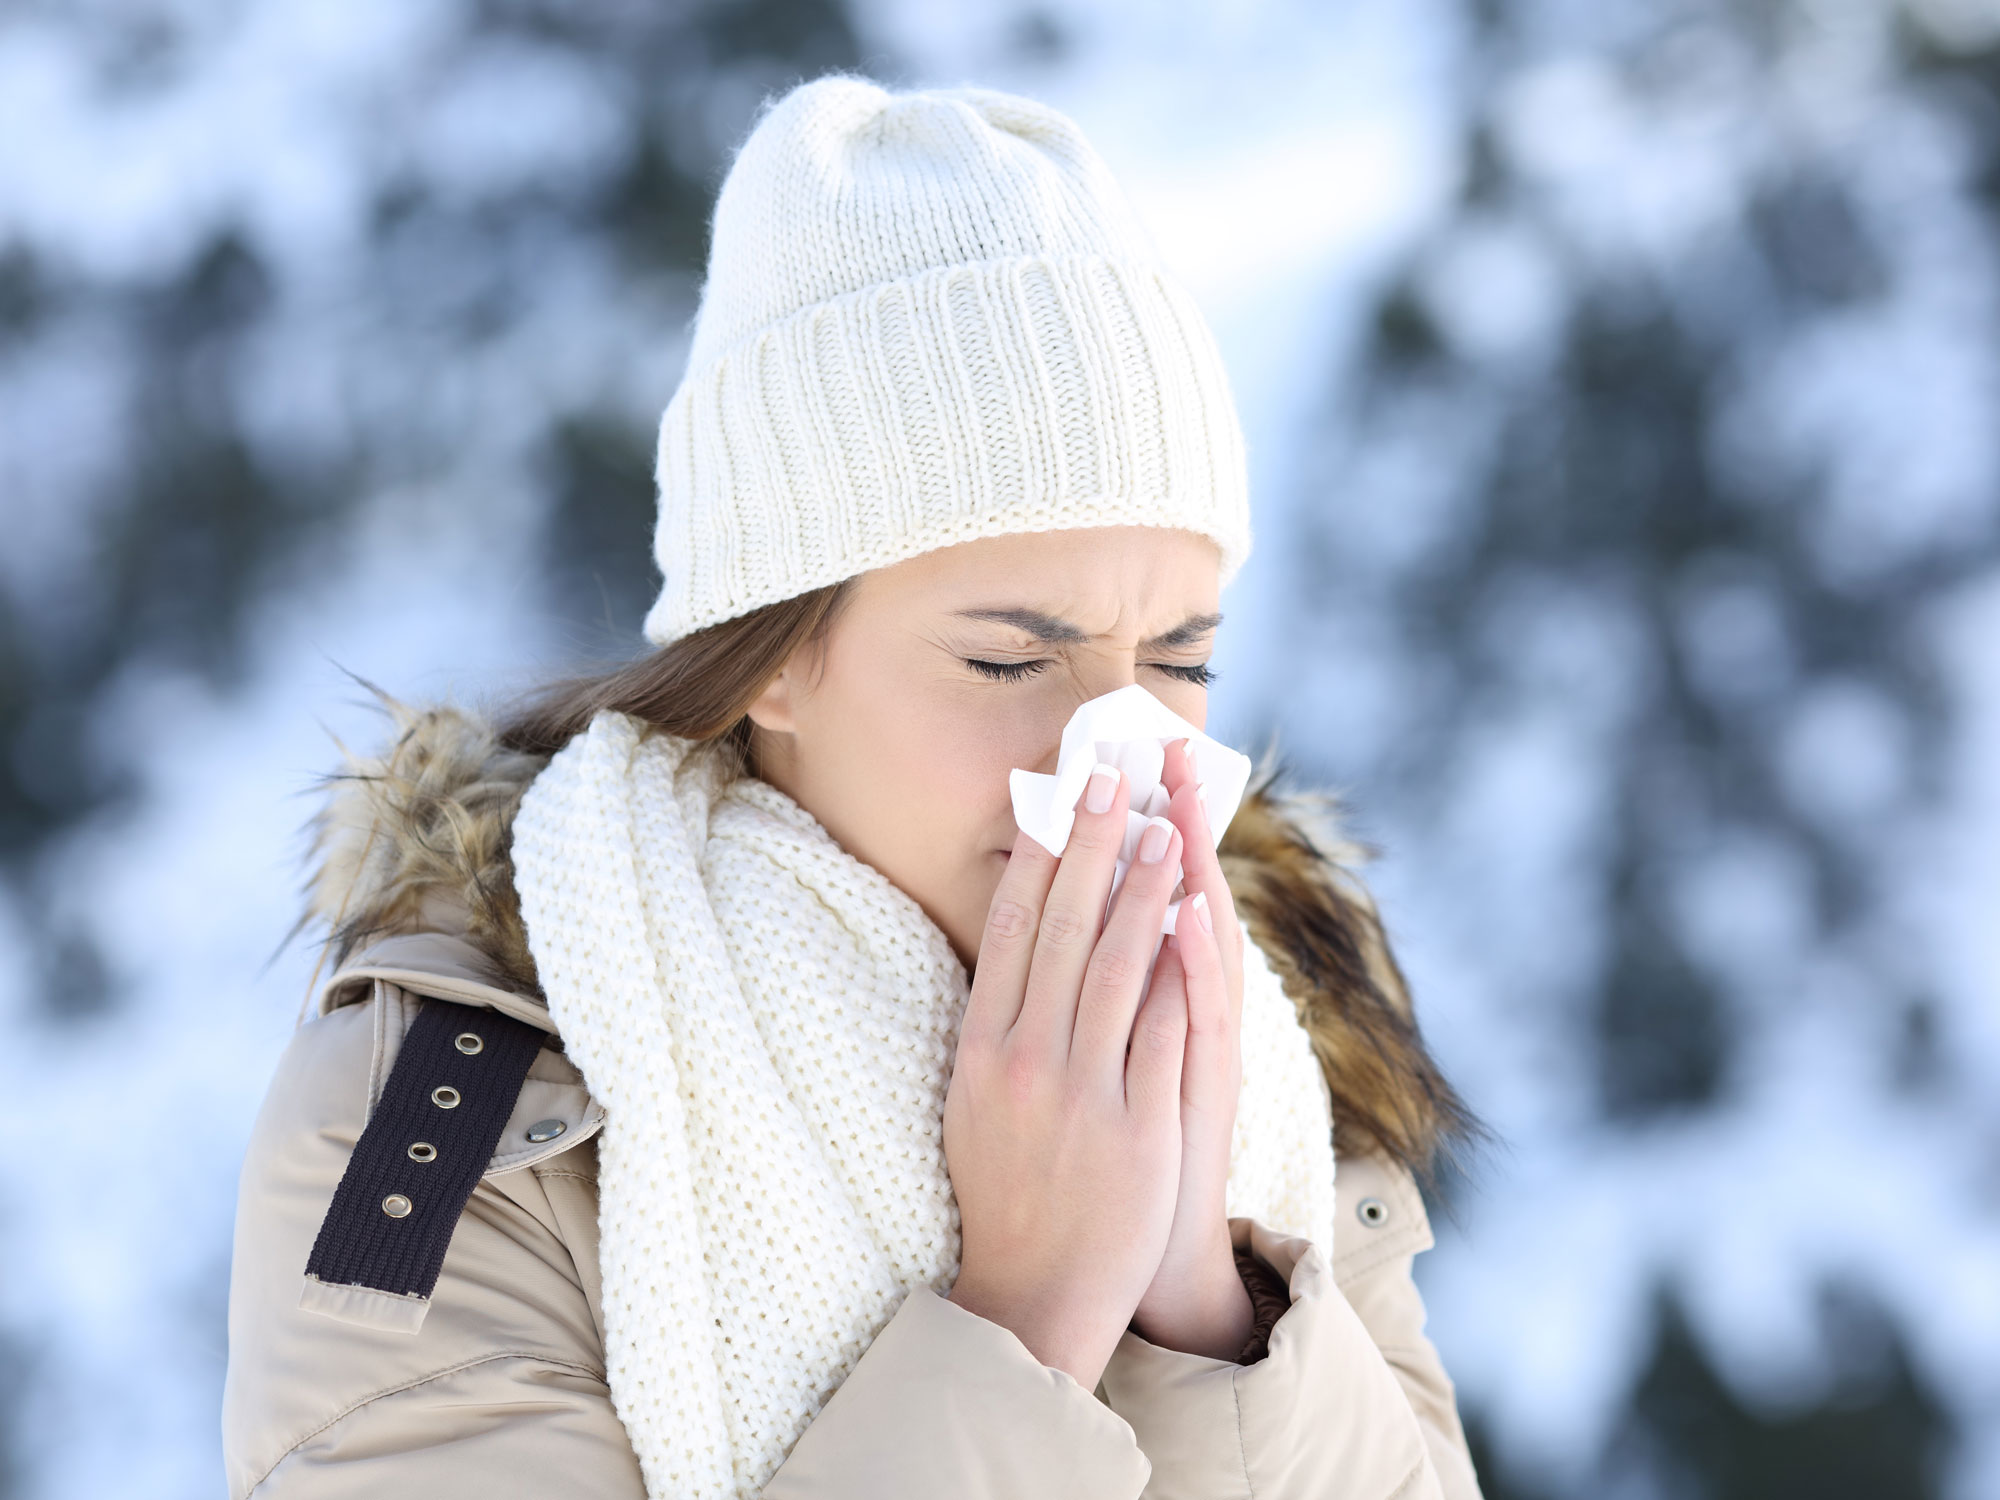 The shocking thing increasing your flu risk